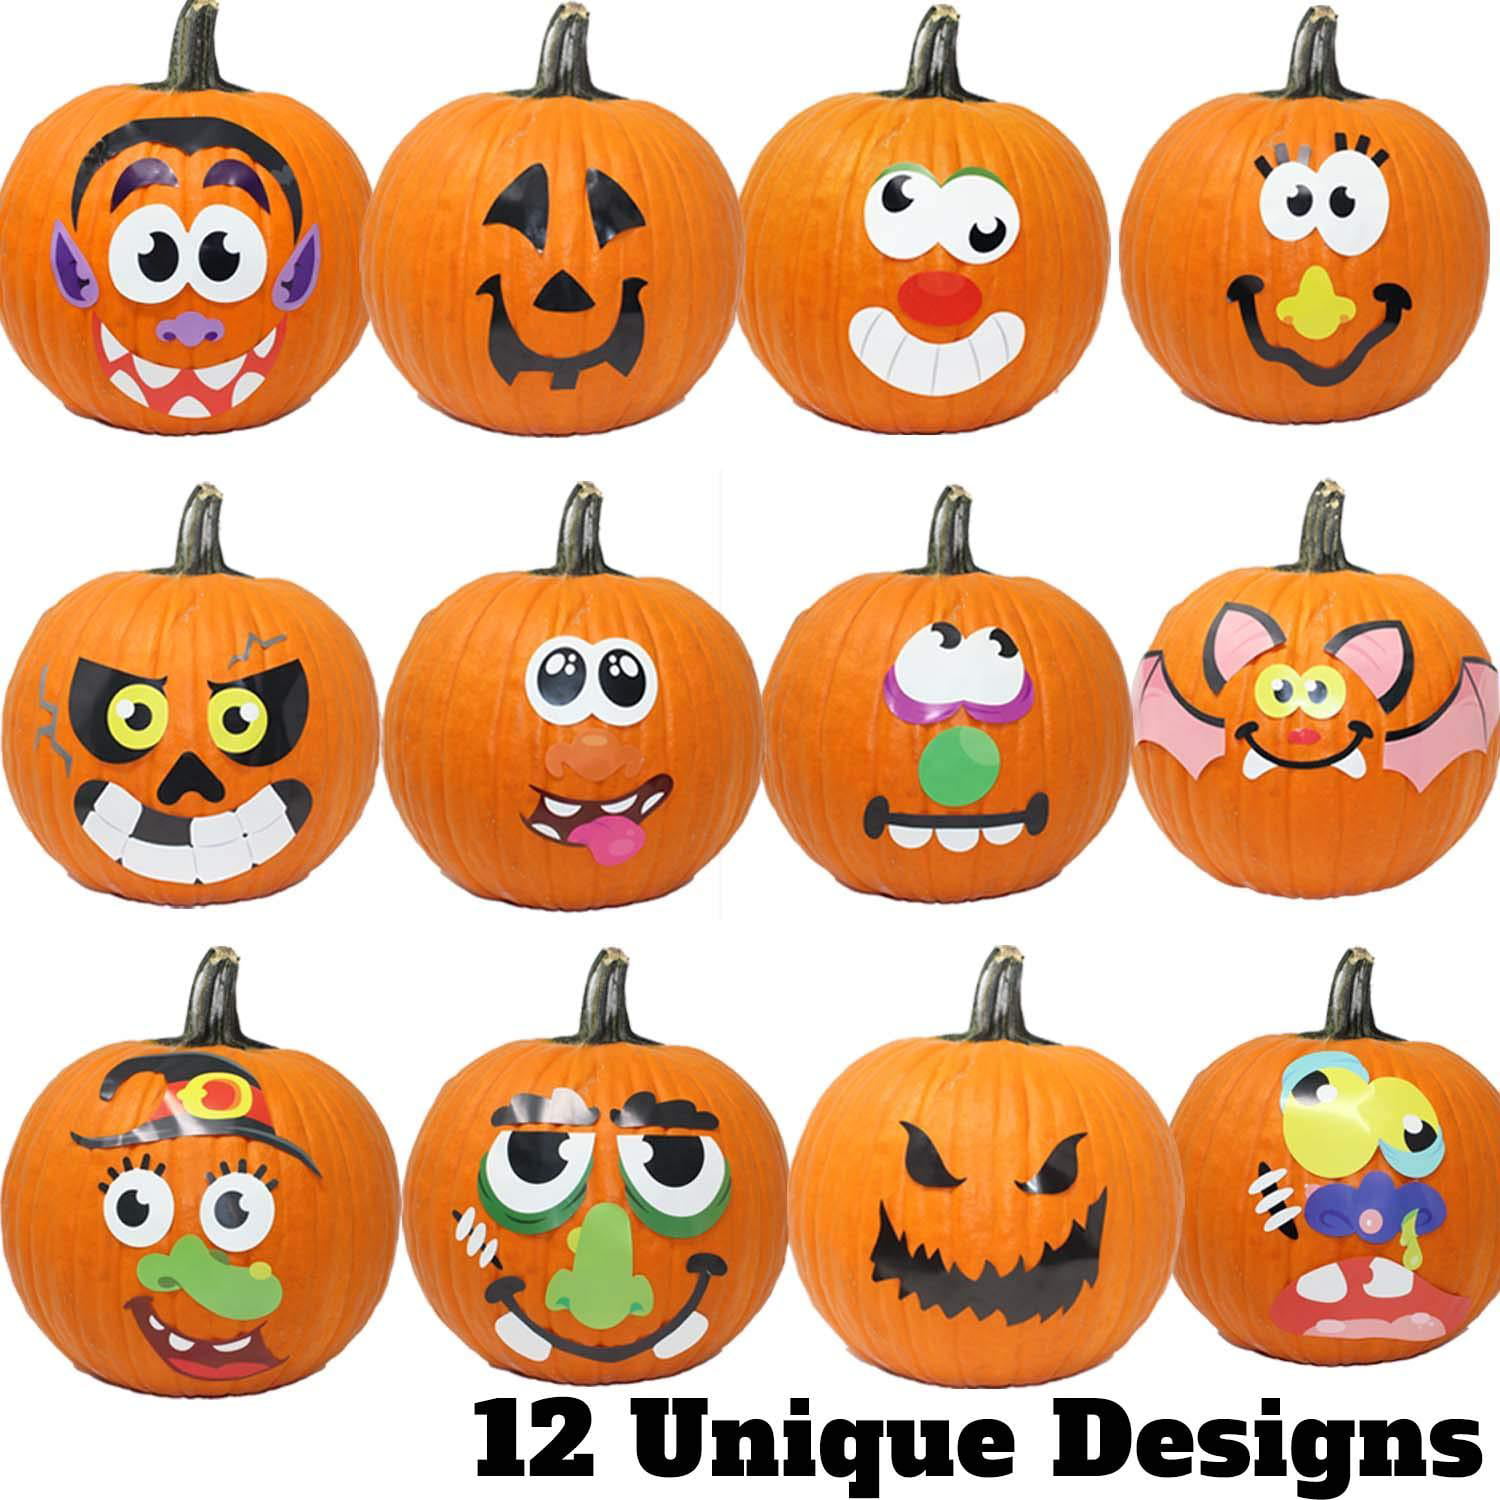 JOYIN Make 40 Faces Pumpkin Decorating Stickers with 18 Sticker Sheets in 12 Different Designs and Sizes Halloween Party Supplies Trick or Treat Party Favors